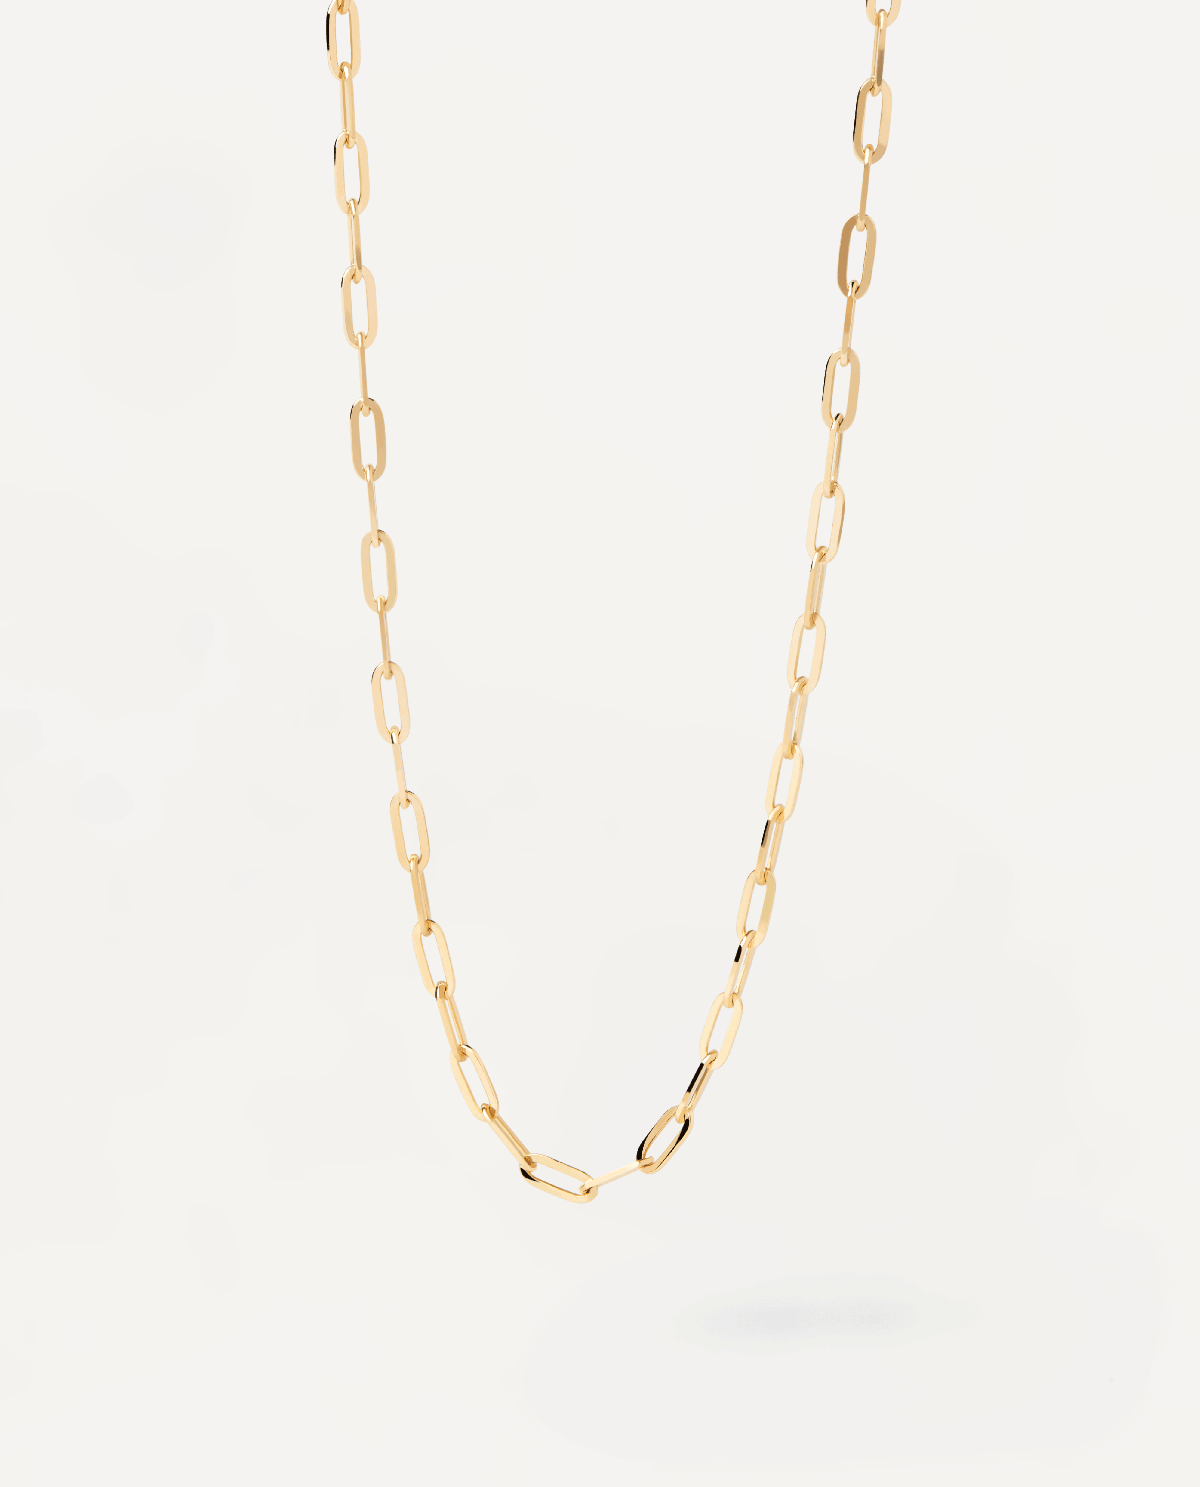 2023 Selection | Gold Cable Chain Necklace. 18K solid yellow gold chain necklace with cable links. Get the latest arrival from PDPAOLA. Place your order safely and get this Best Seller. Free Shipping.